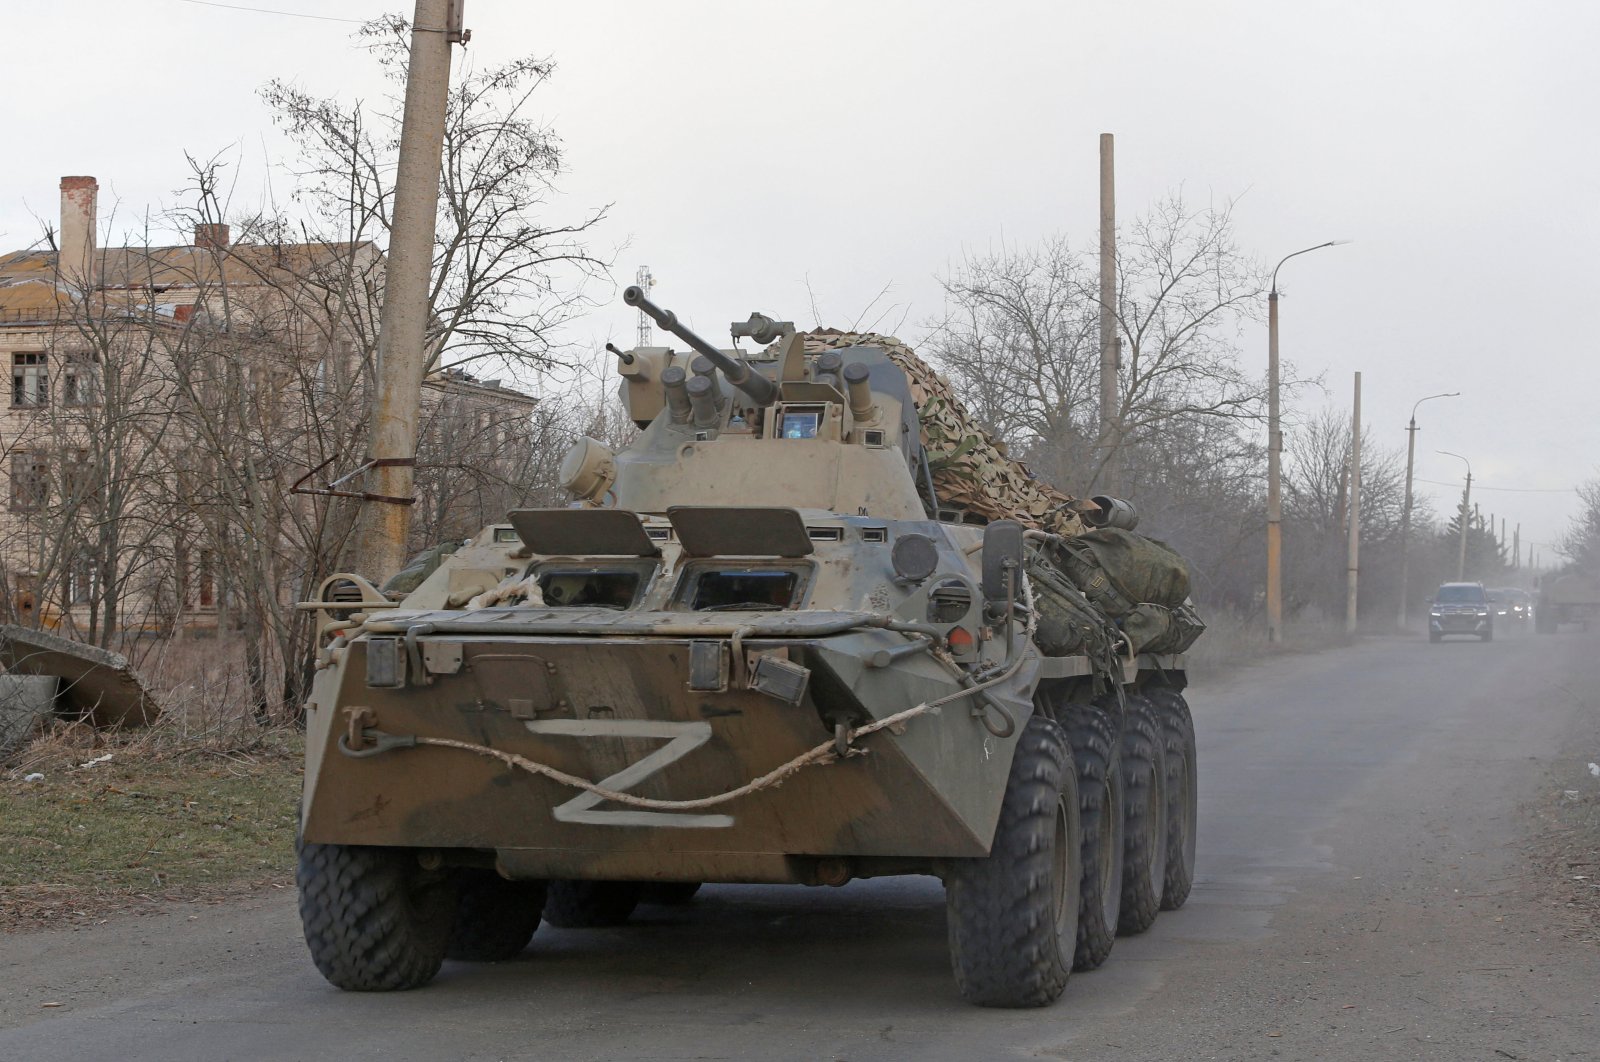 An armoured vehicle of pro-Russian troops with the symbol &quot;Z&quot; painted on its front drives along a road during Ukraine-Russia conflict near the besieged southern port city of Mariupol, Ukraine, March 27, 2022. (Reuters Photo)